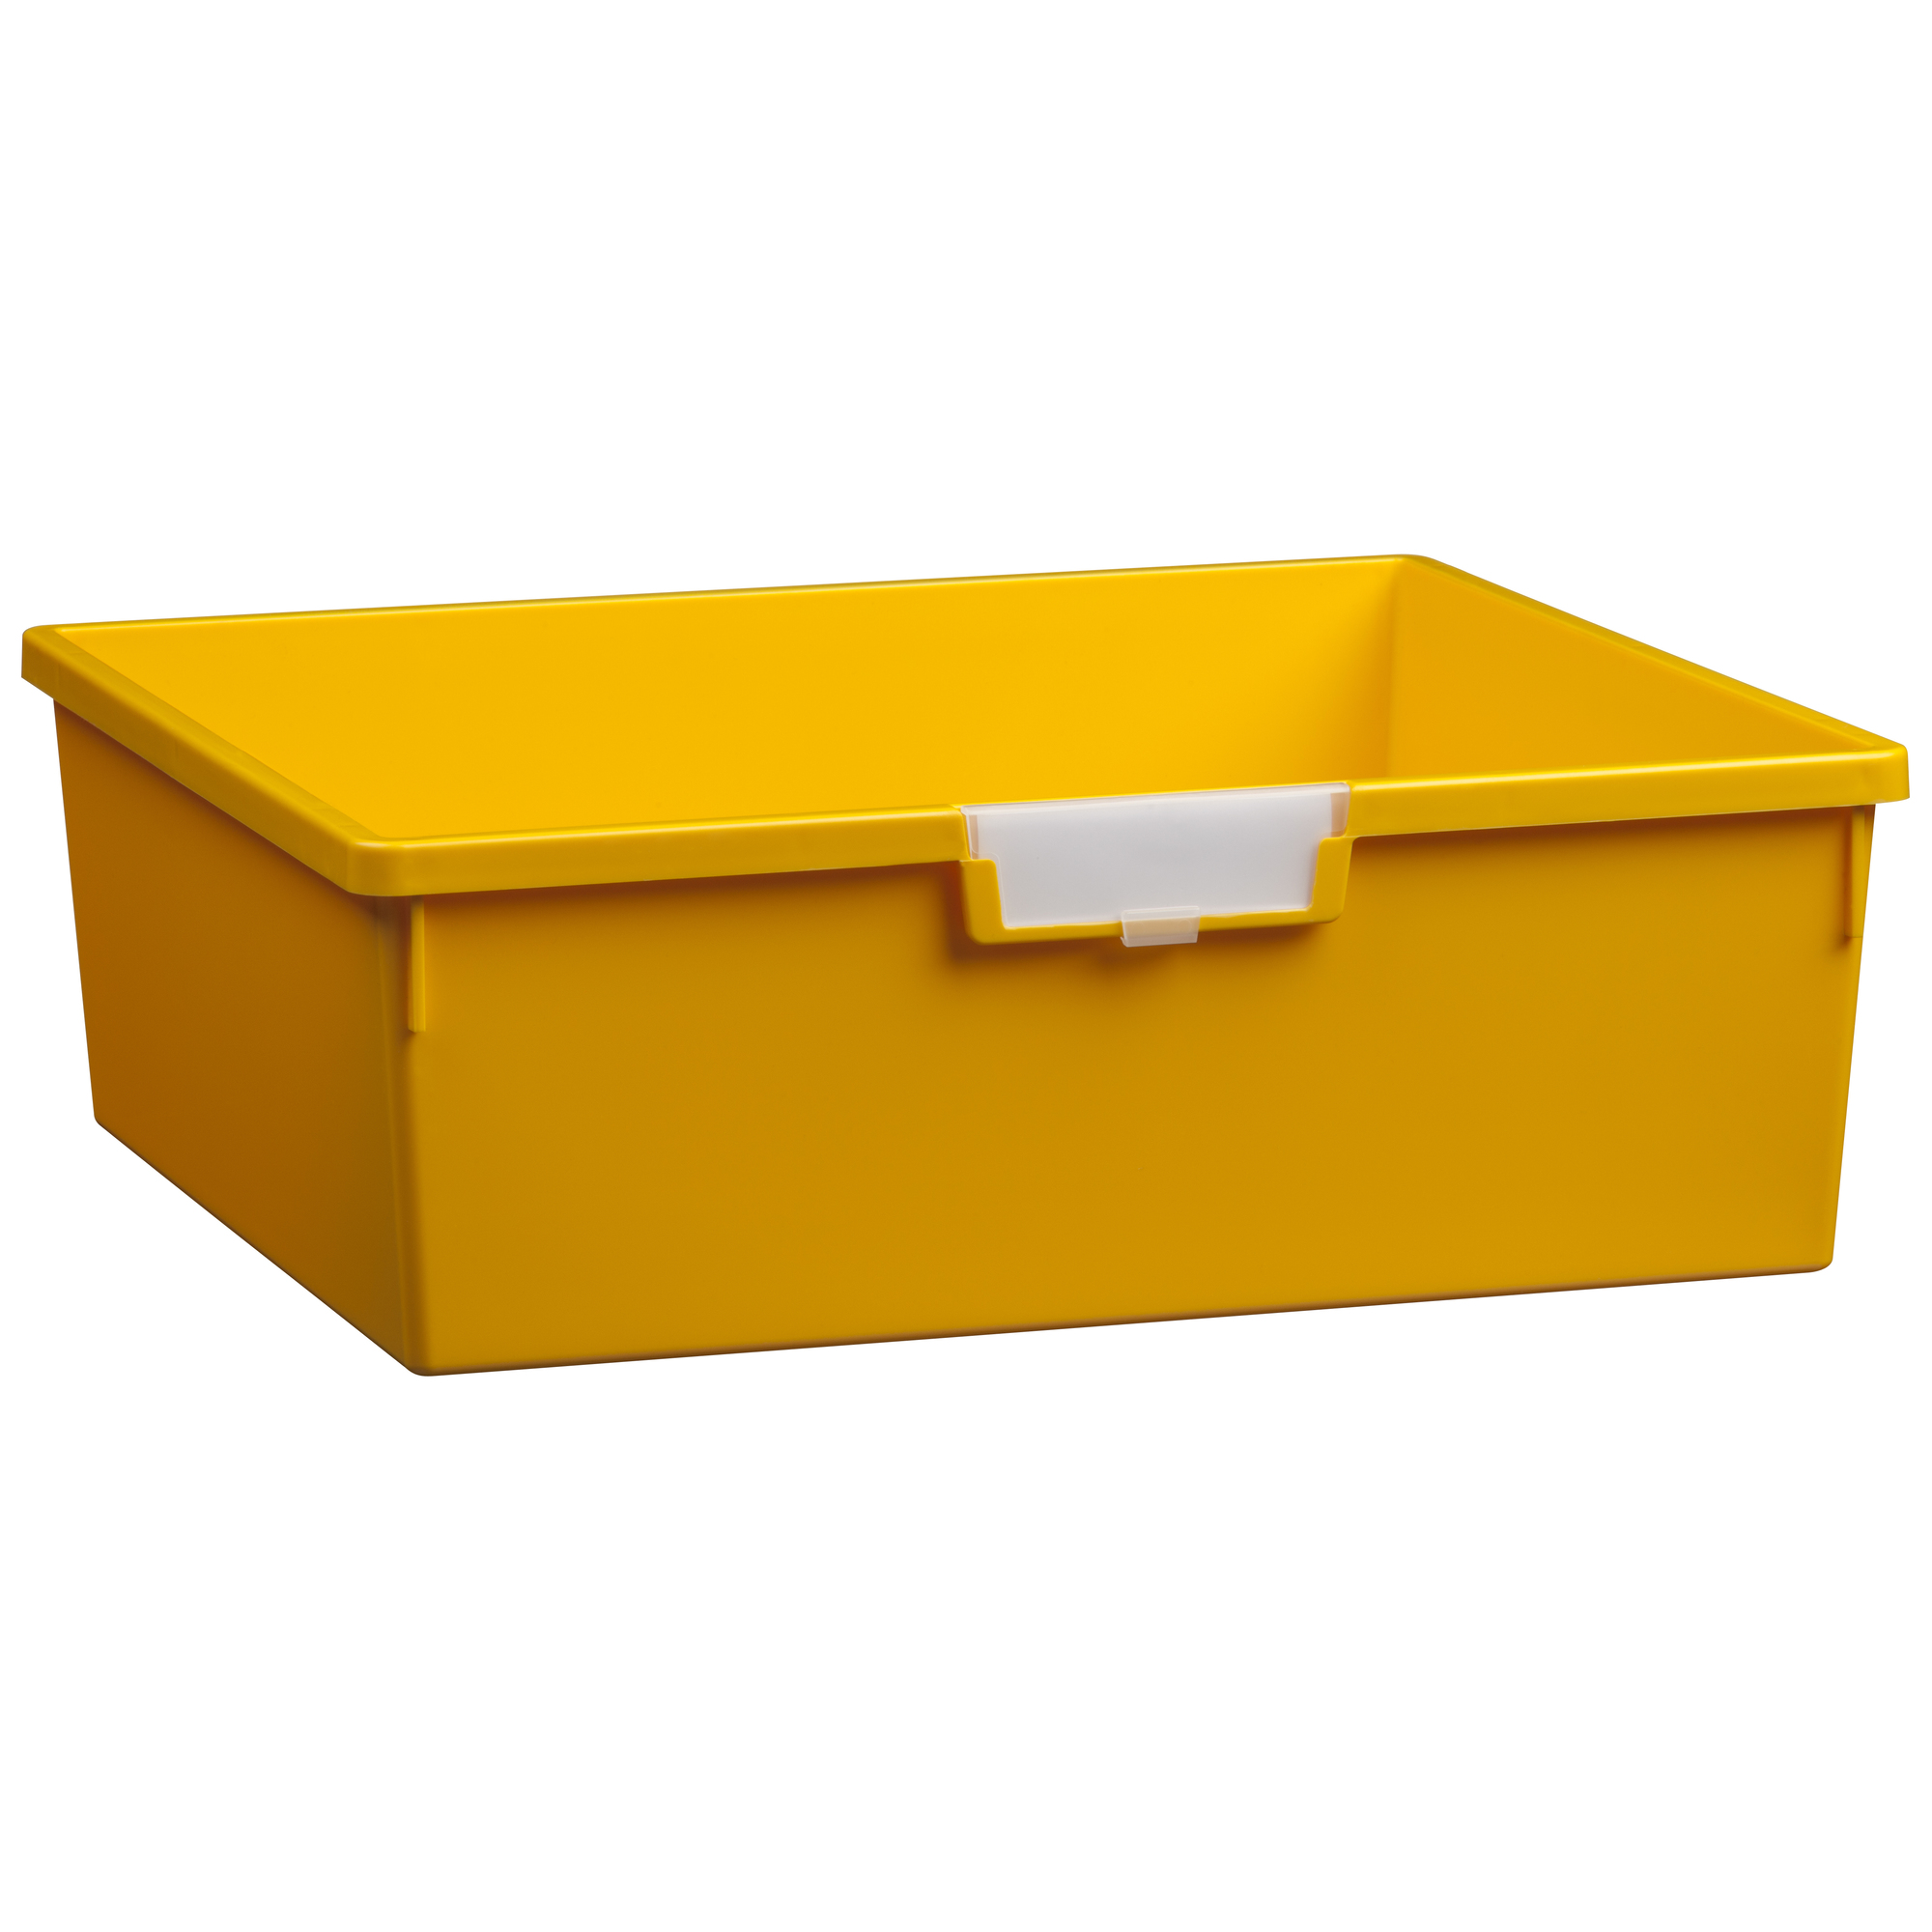 Certwood StorWerks, Wide Line 6Inch Tray in Primary Yellow-1PK, Included (qty.) 1, Material Plastic, Height 6 in, Model CE1958PY1